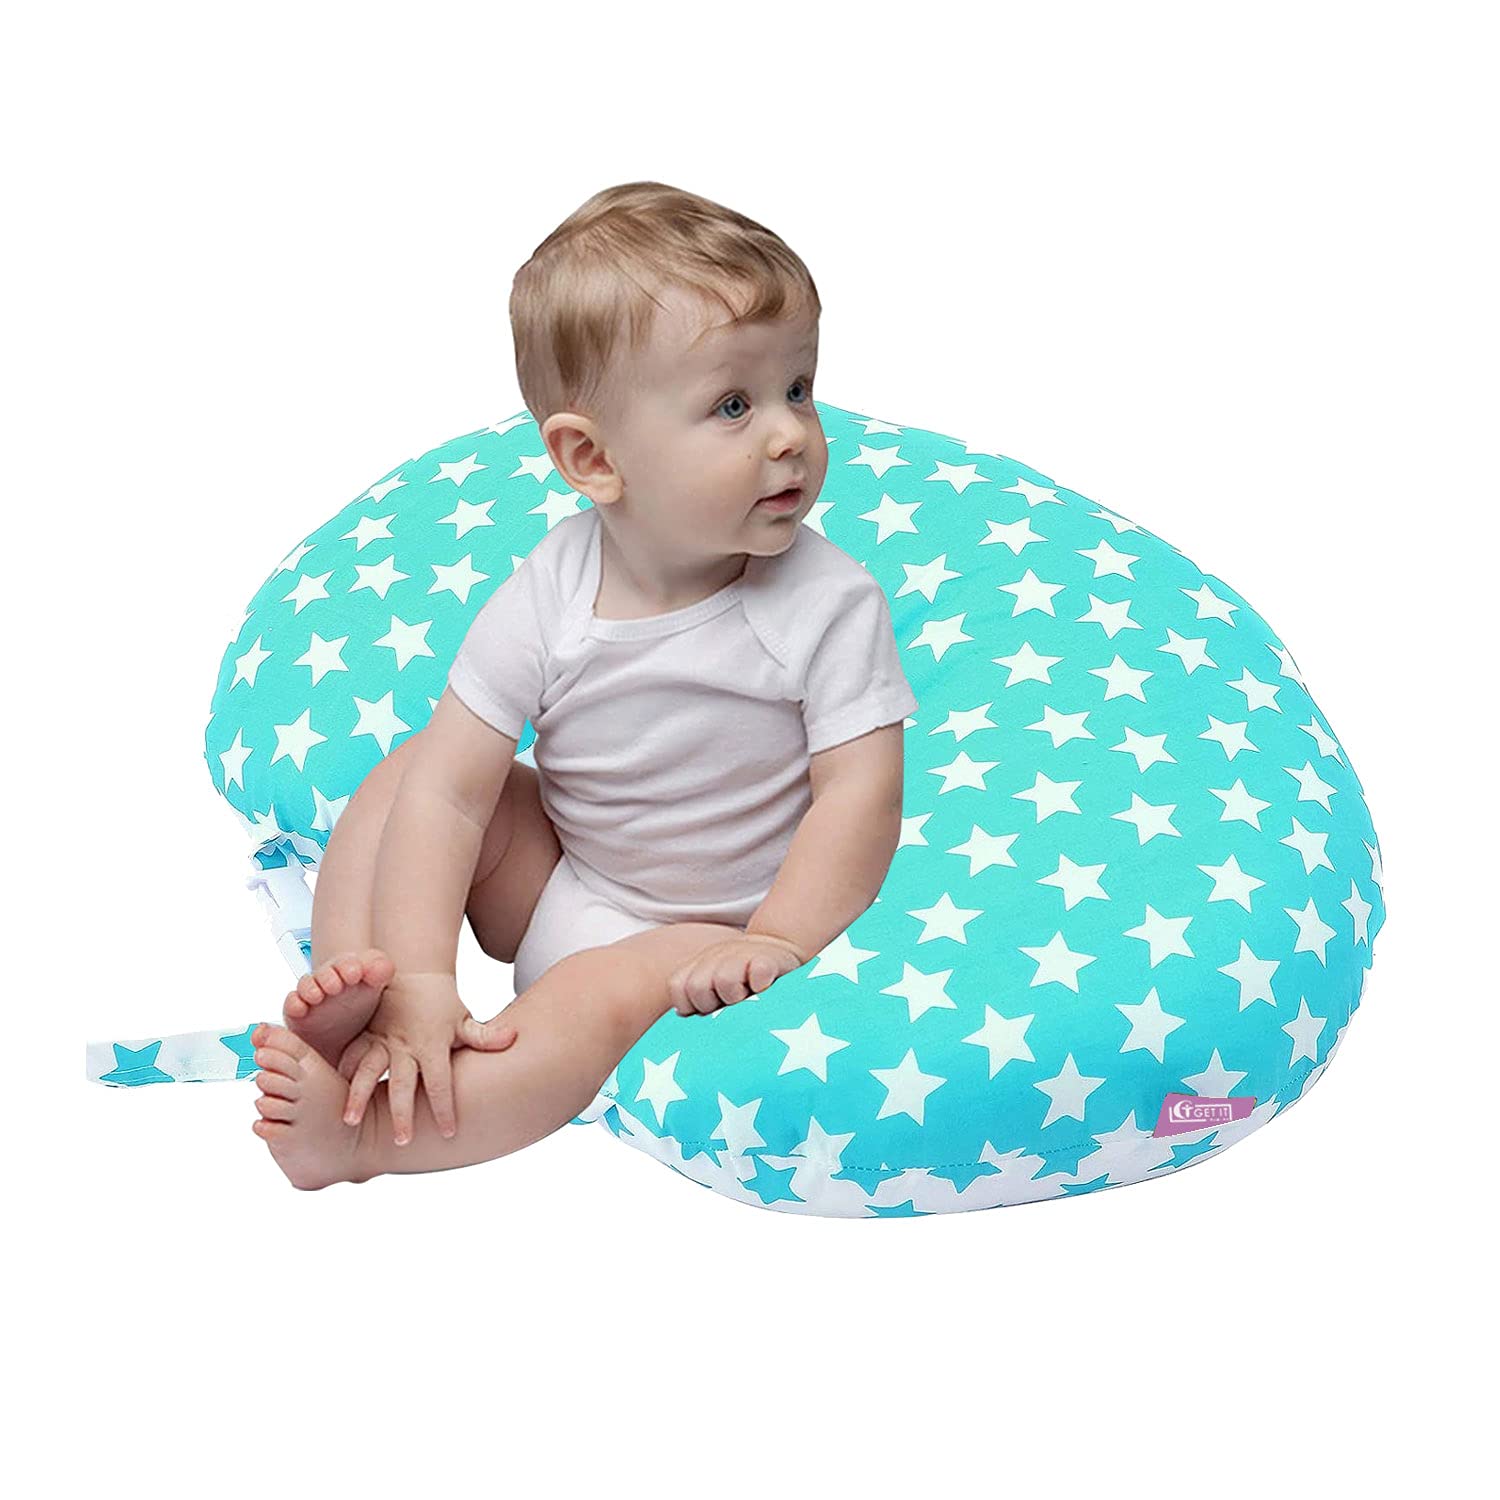 Get It Cotton 5-in-1 Feeding Pillow with Detachable Cover